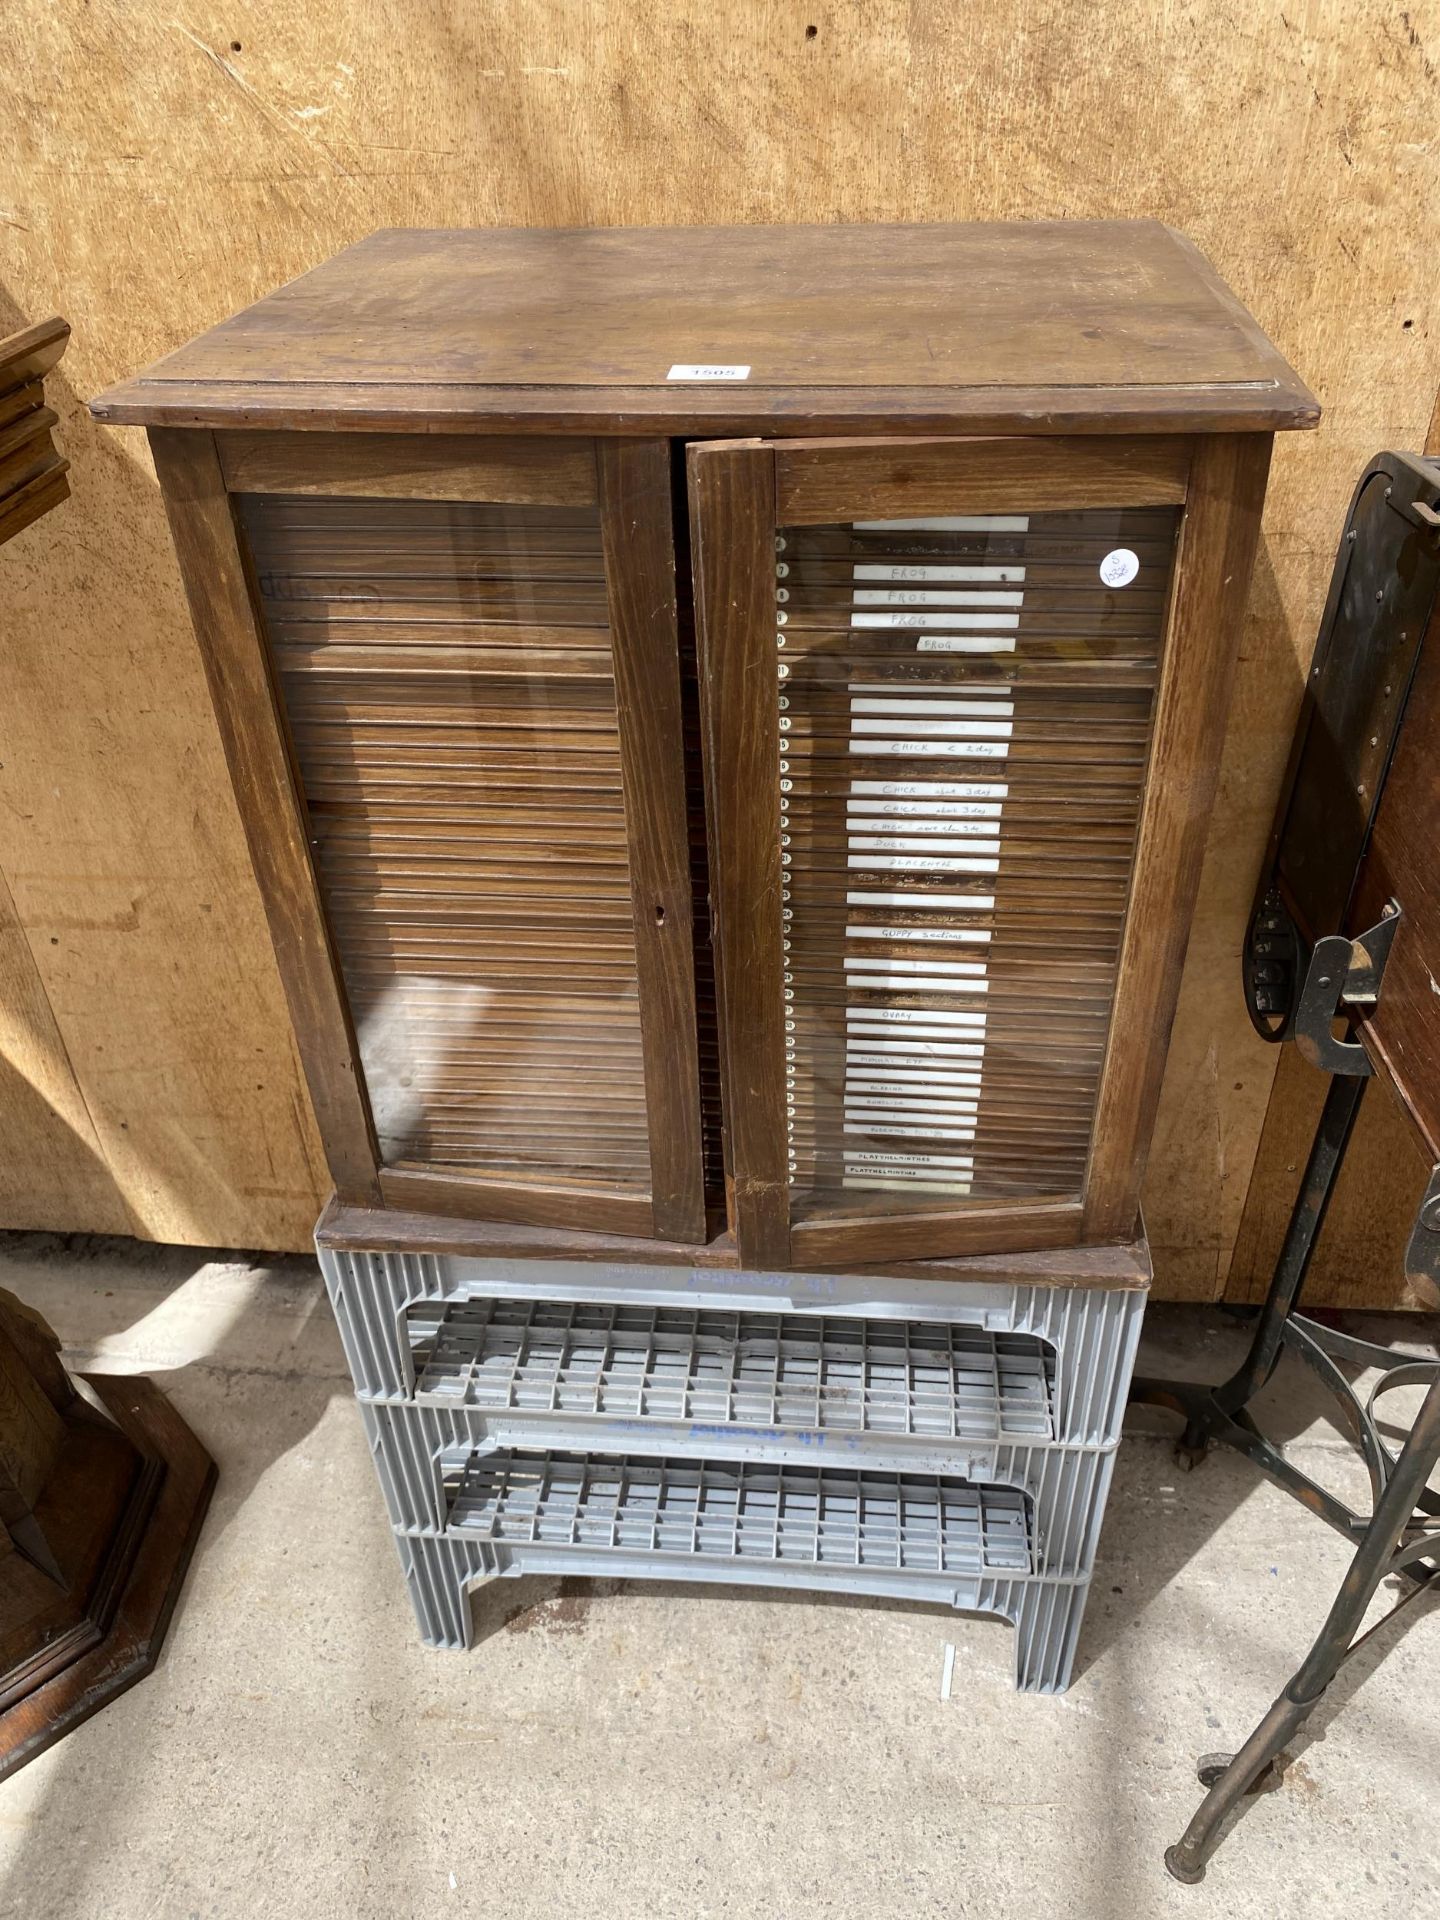 A VINTAGE OAK ENTOMOLOGY CABINET WITH 42 DRAWERS AND GLASS DOORS